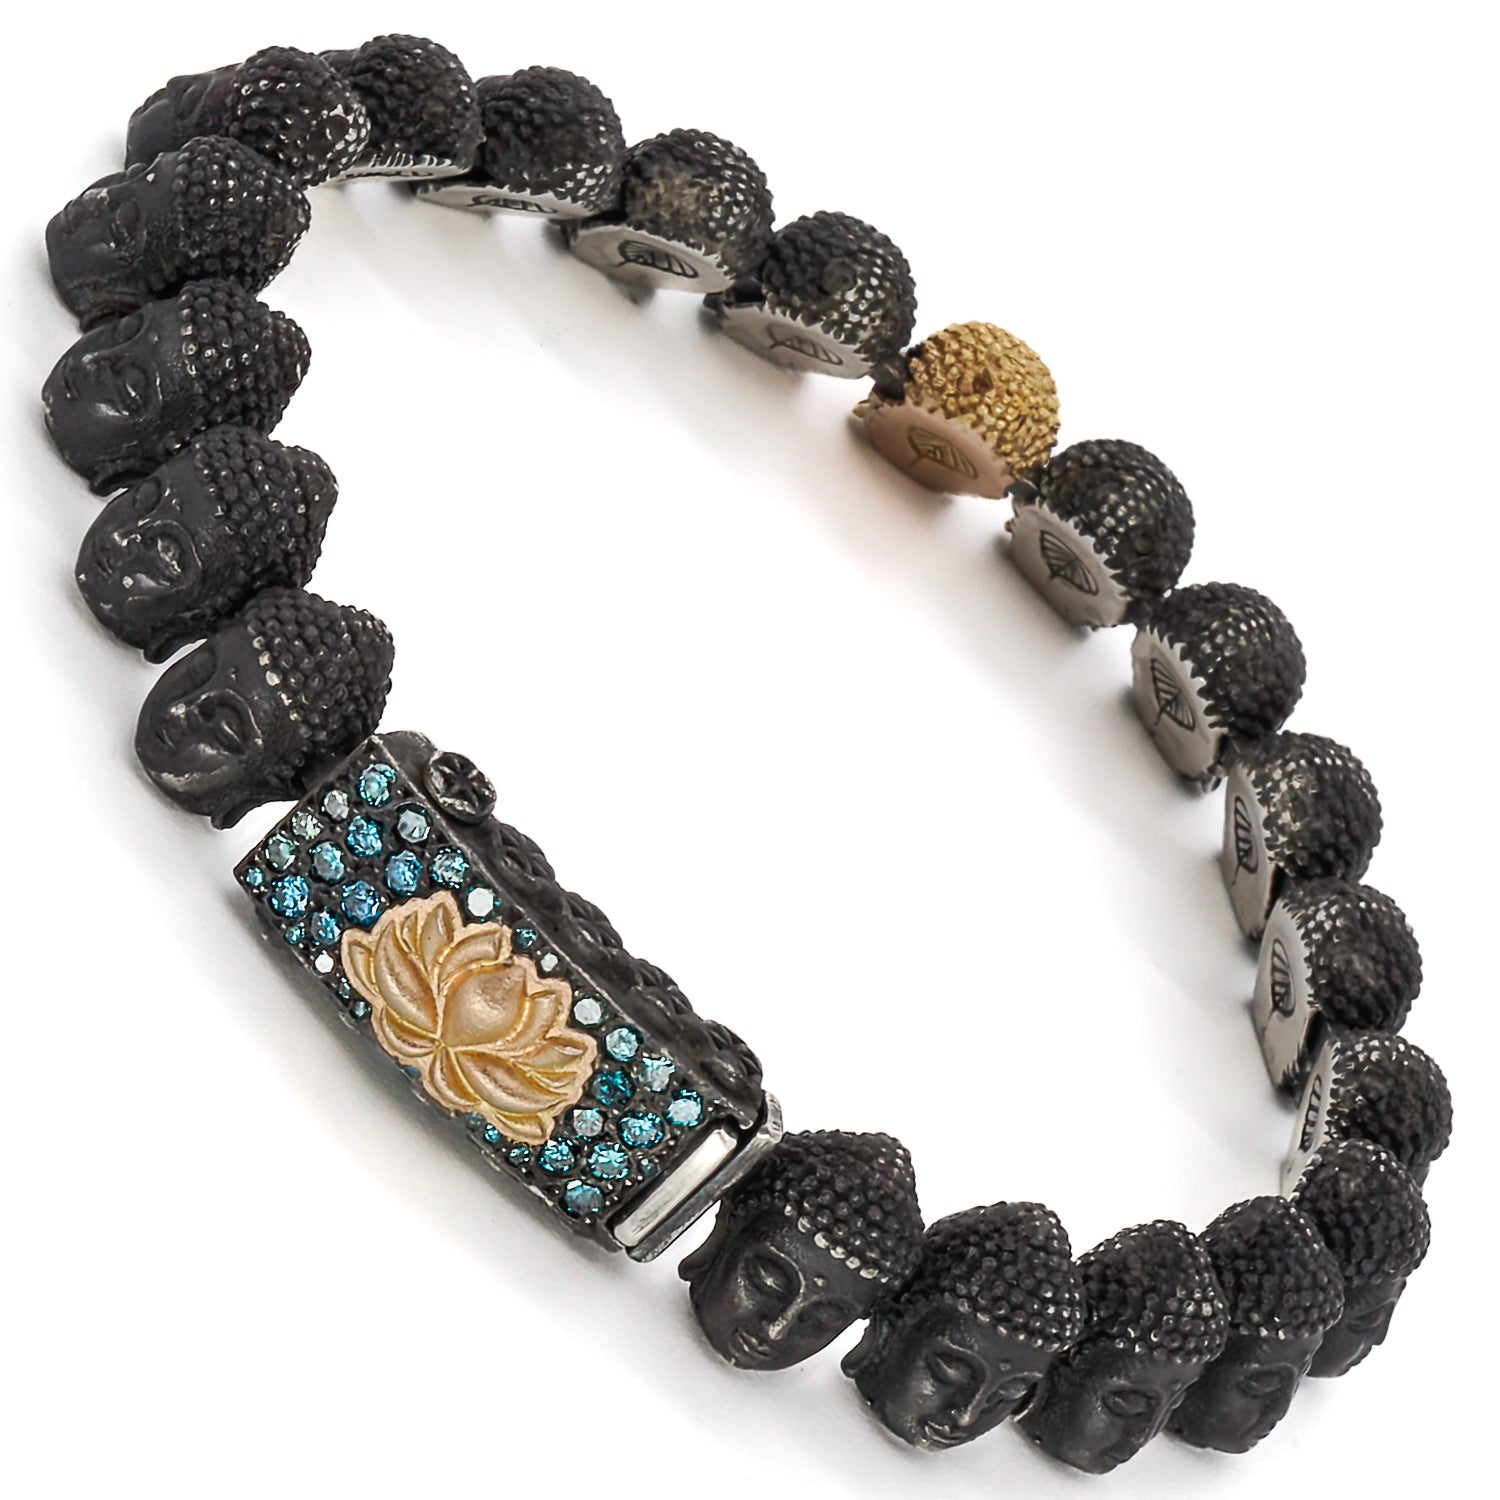 Elegance and Spirituality - Sterling Silver and 18K Gold Buddha Bracelet with Blue Diamonds.